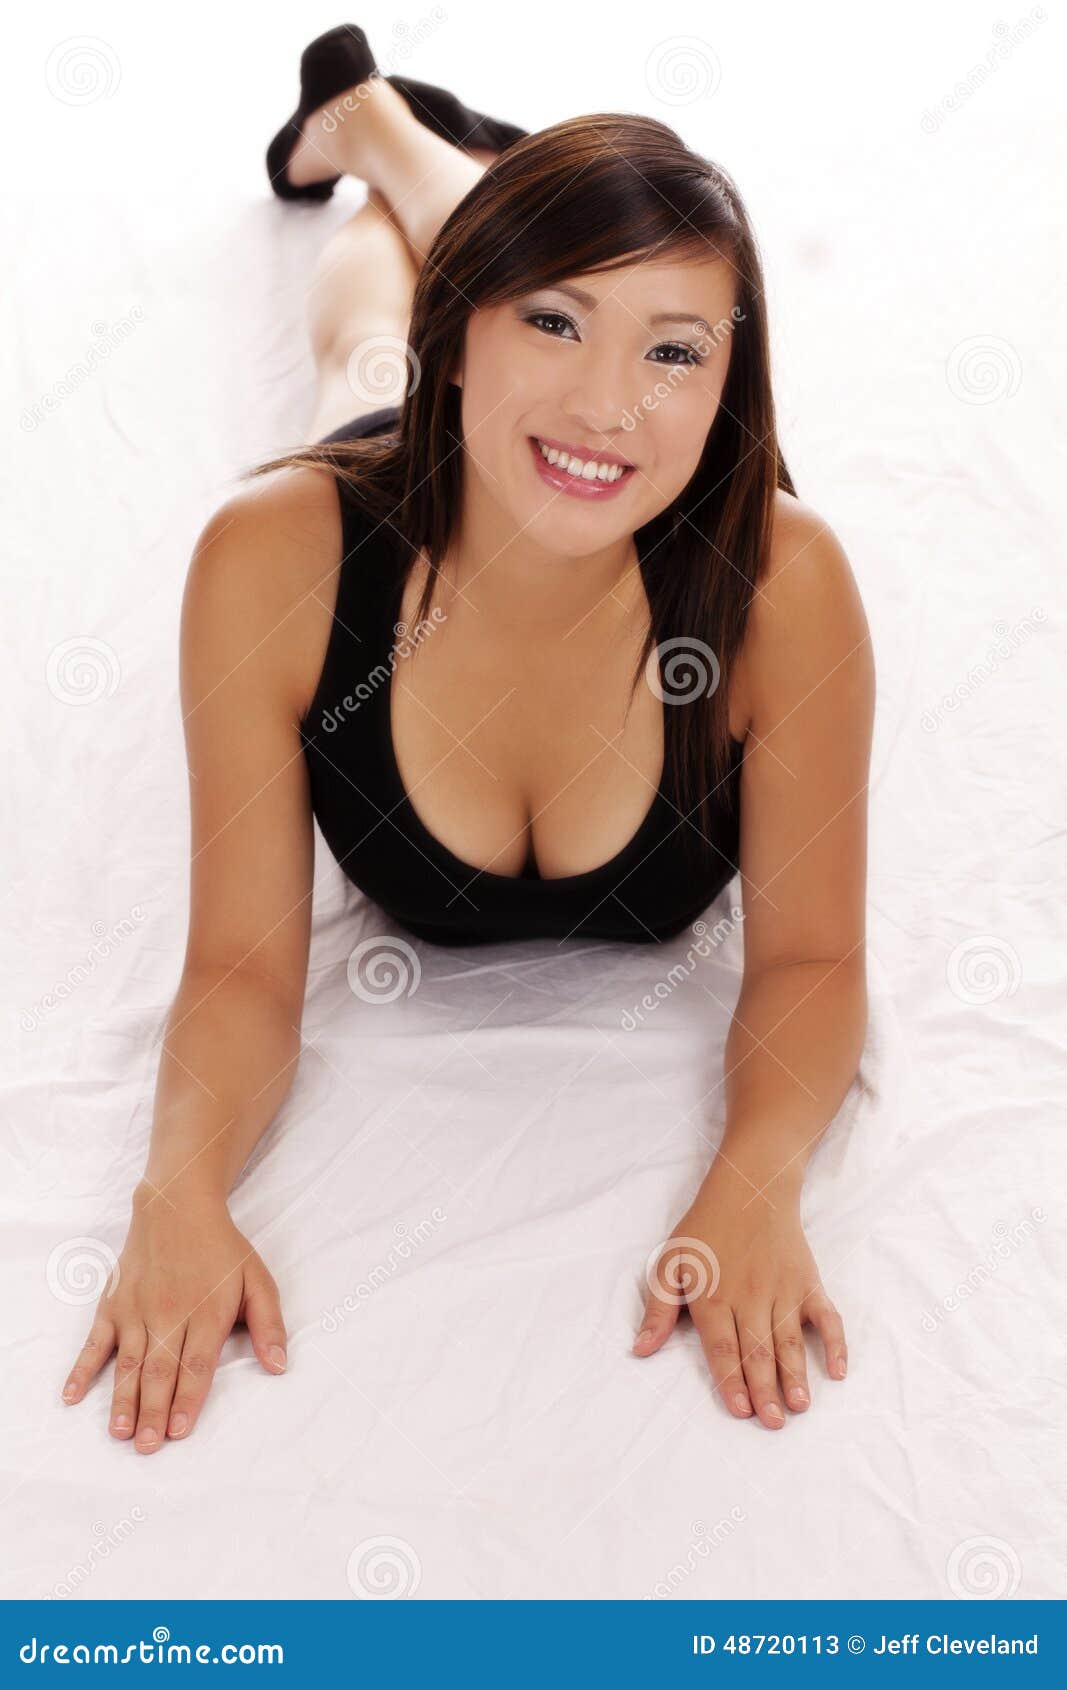 445 Teen Cleavage Photos Free Royalty Free Stock Photos From Dreamstime